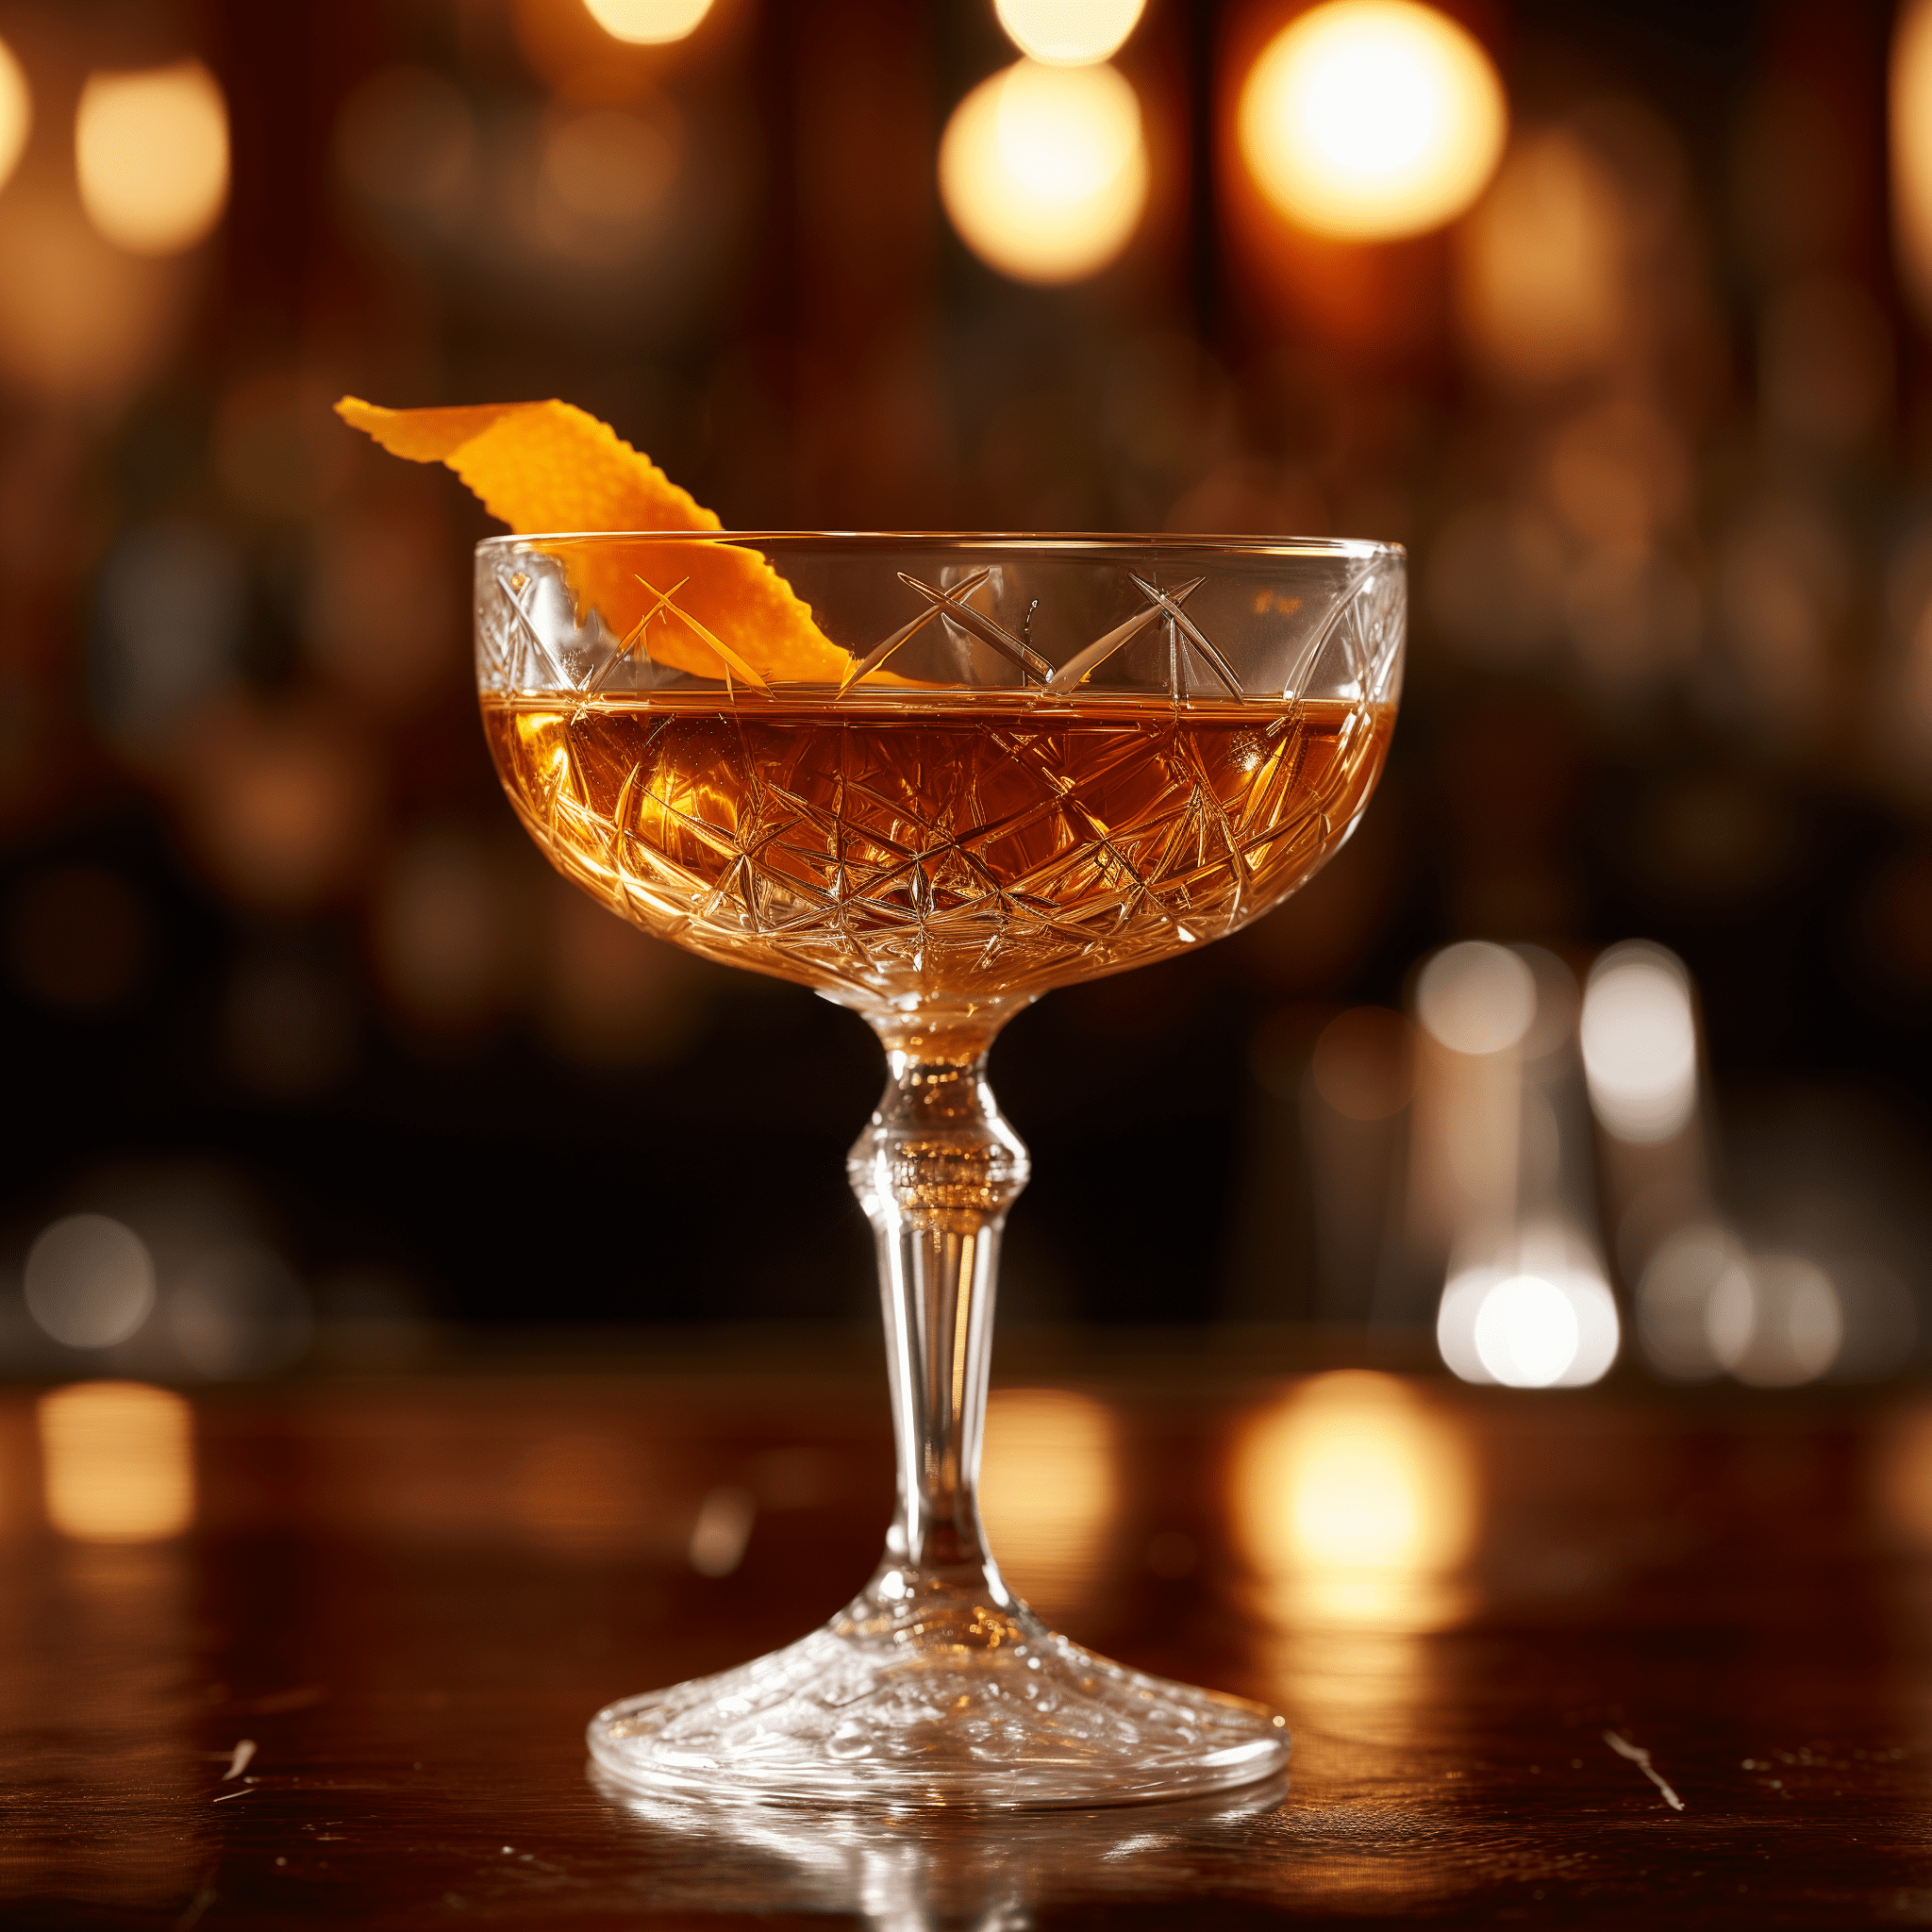 The Tartan cocktail offers a rich tapestry of flavors. It's a strong and warming drink, with the smoky peat of the Scotch and the herbal bitterness of the Ramazzotti creating a complex base. The sweetness of the Drambuie and the Cocchi Vermouth di Torino balance the bitterness, while the Angostura bitters add a spicy depth. The orange twist garnish provides a bright, citrus aroma that rounds out the experience.